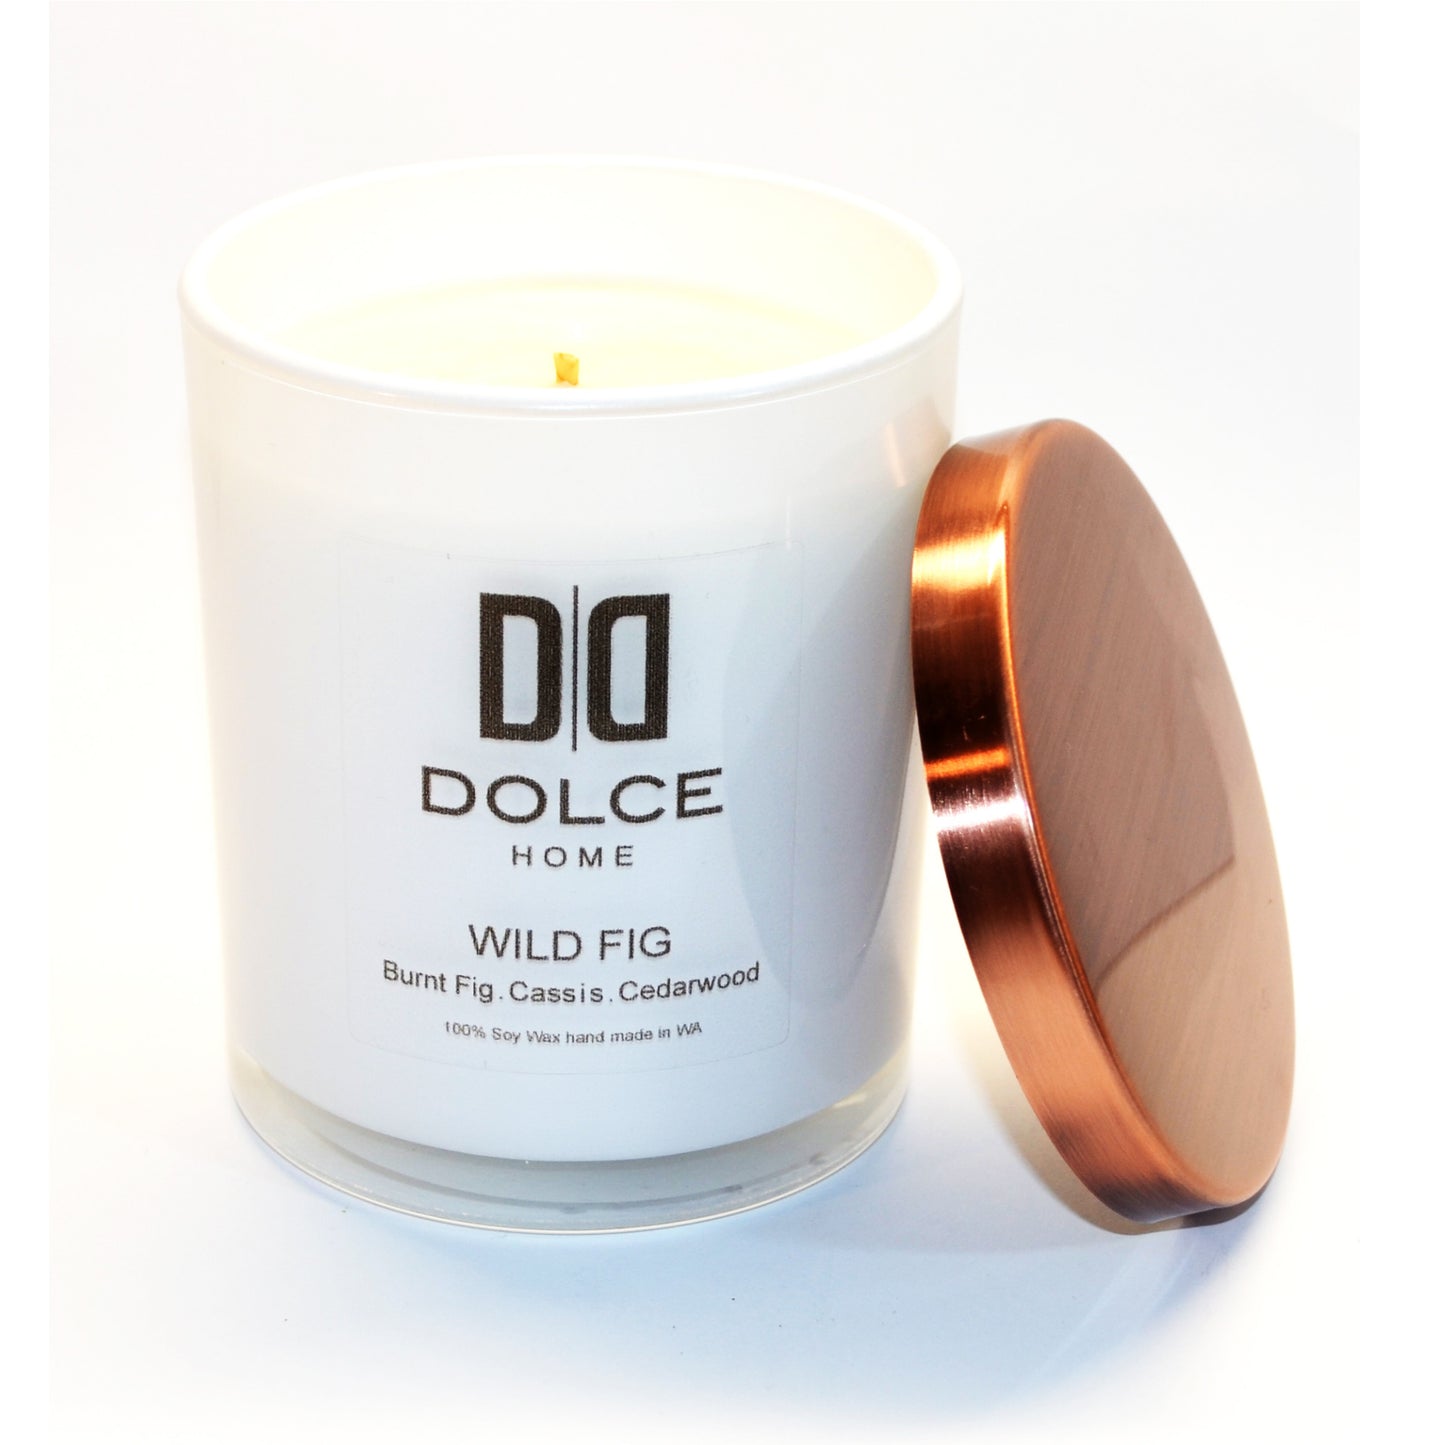 Wild Fig | 300g Soy Wax Candle | Dolce Home | Handmade in W.A.